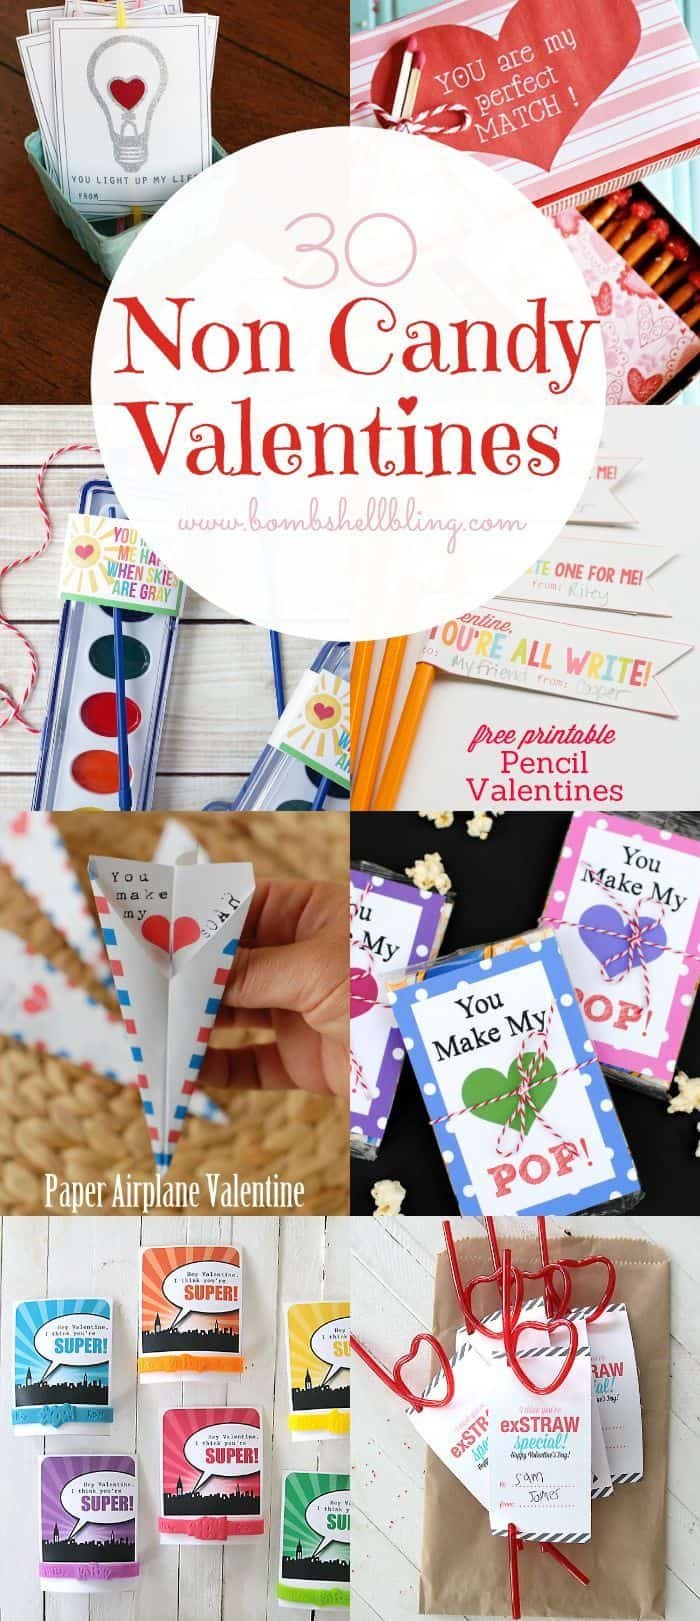 Valentine Day Gift Ideas For Kids
 10 Non Candy Valentine s Day Gift Ideas for Kids